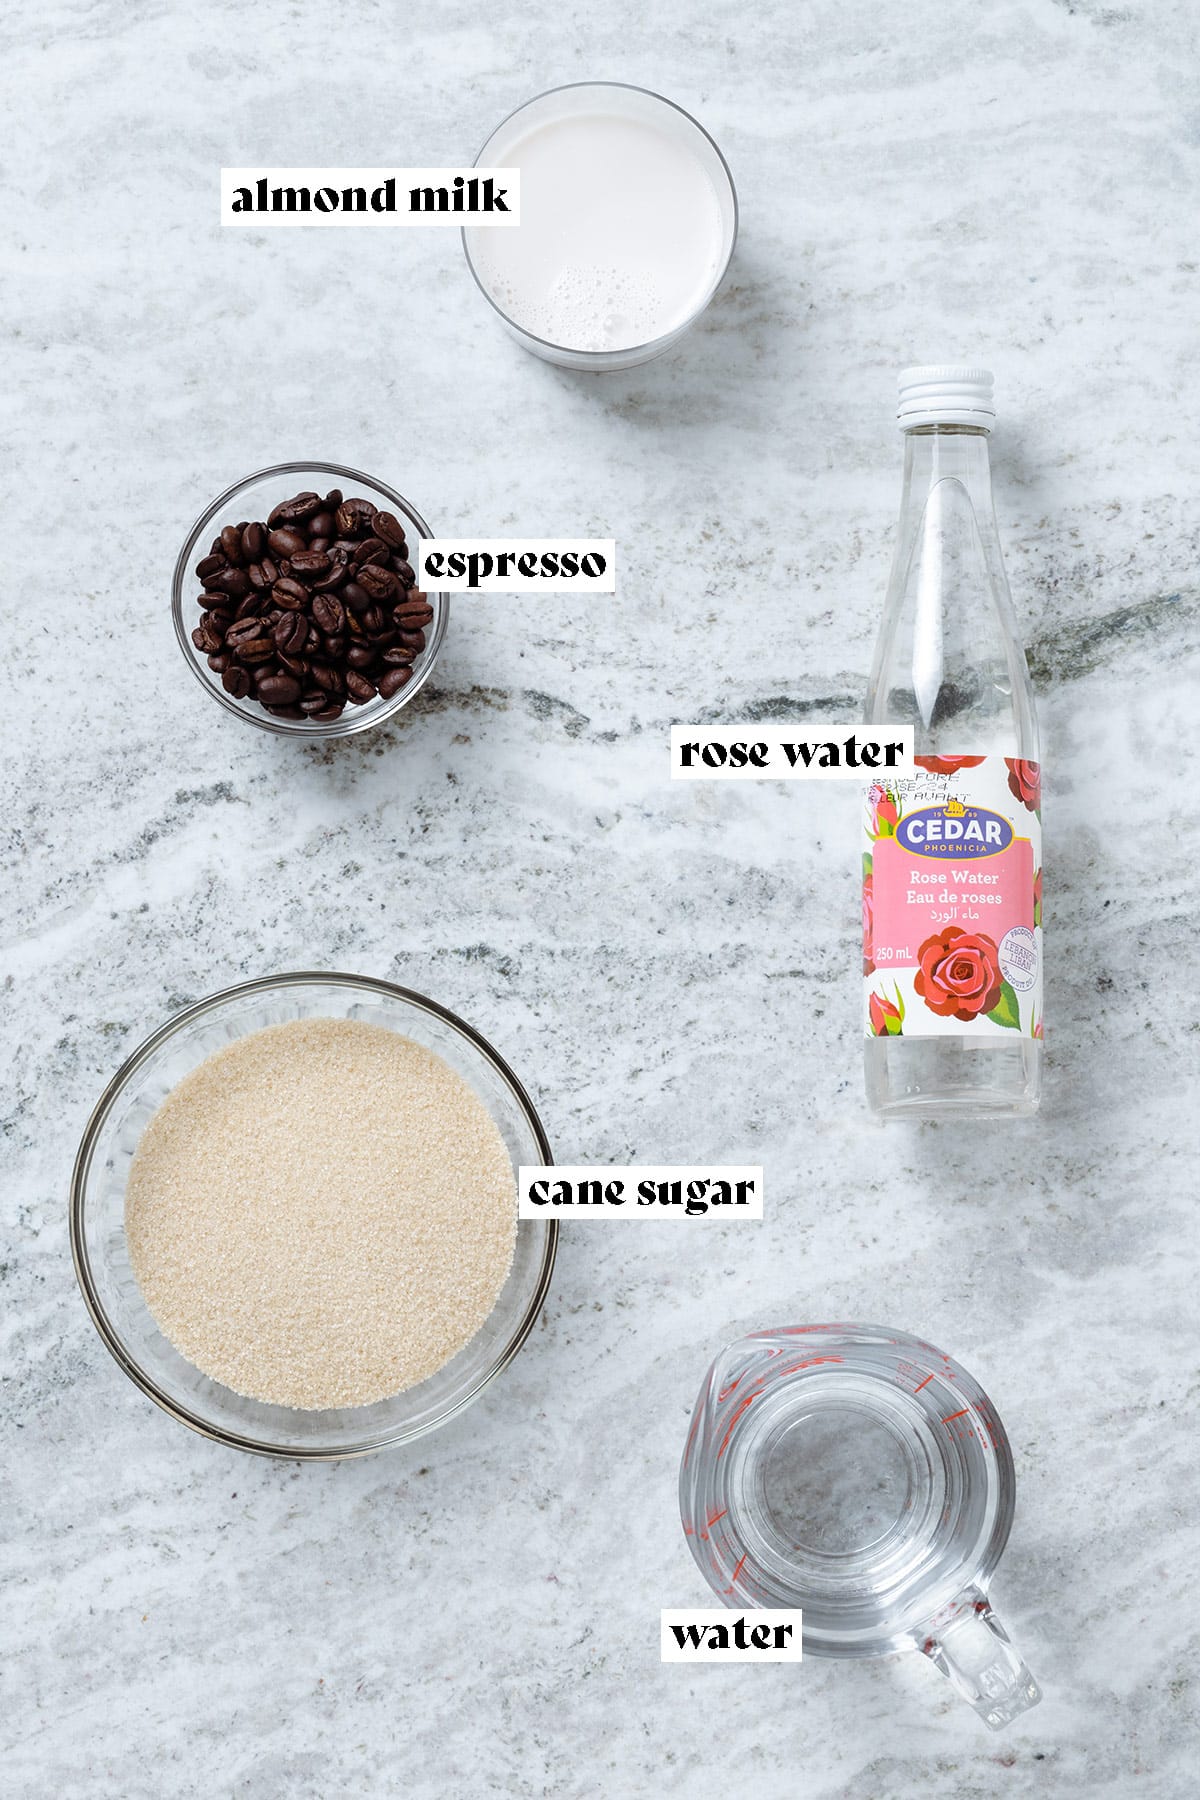 Milk, rose water, coffee beans, cane sugar, and water all measured and laid out with text overlay.